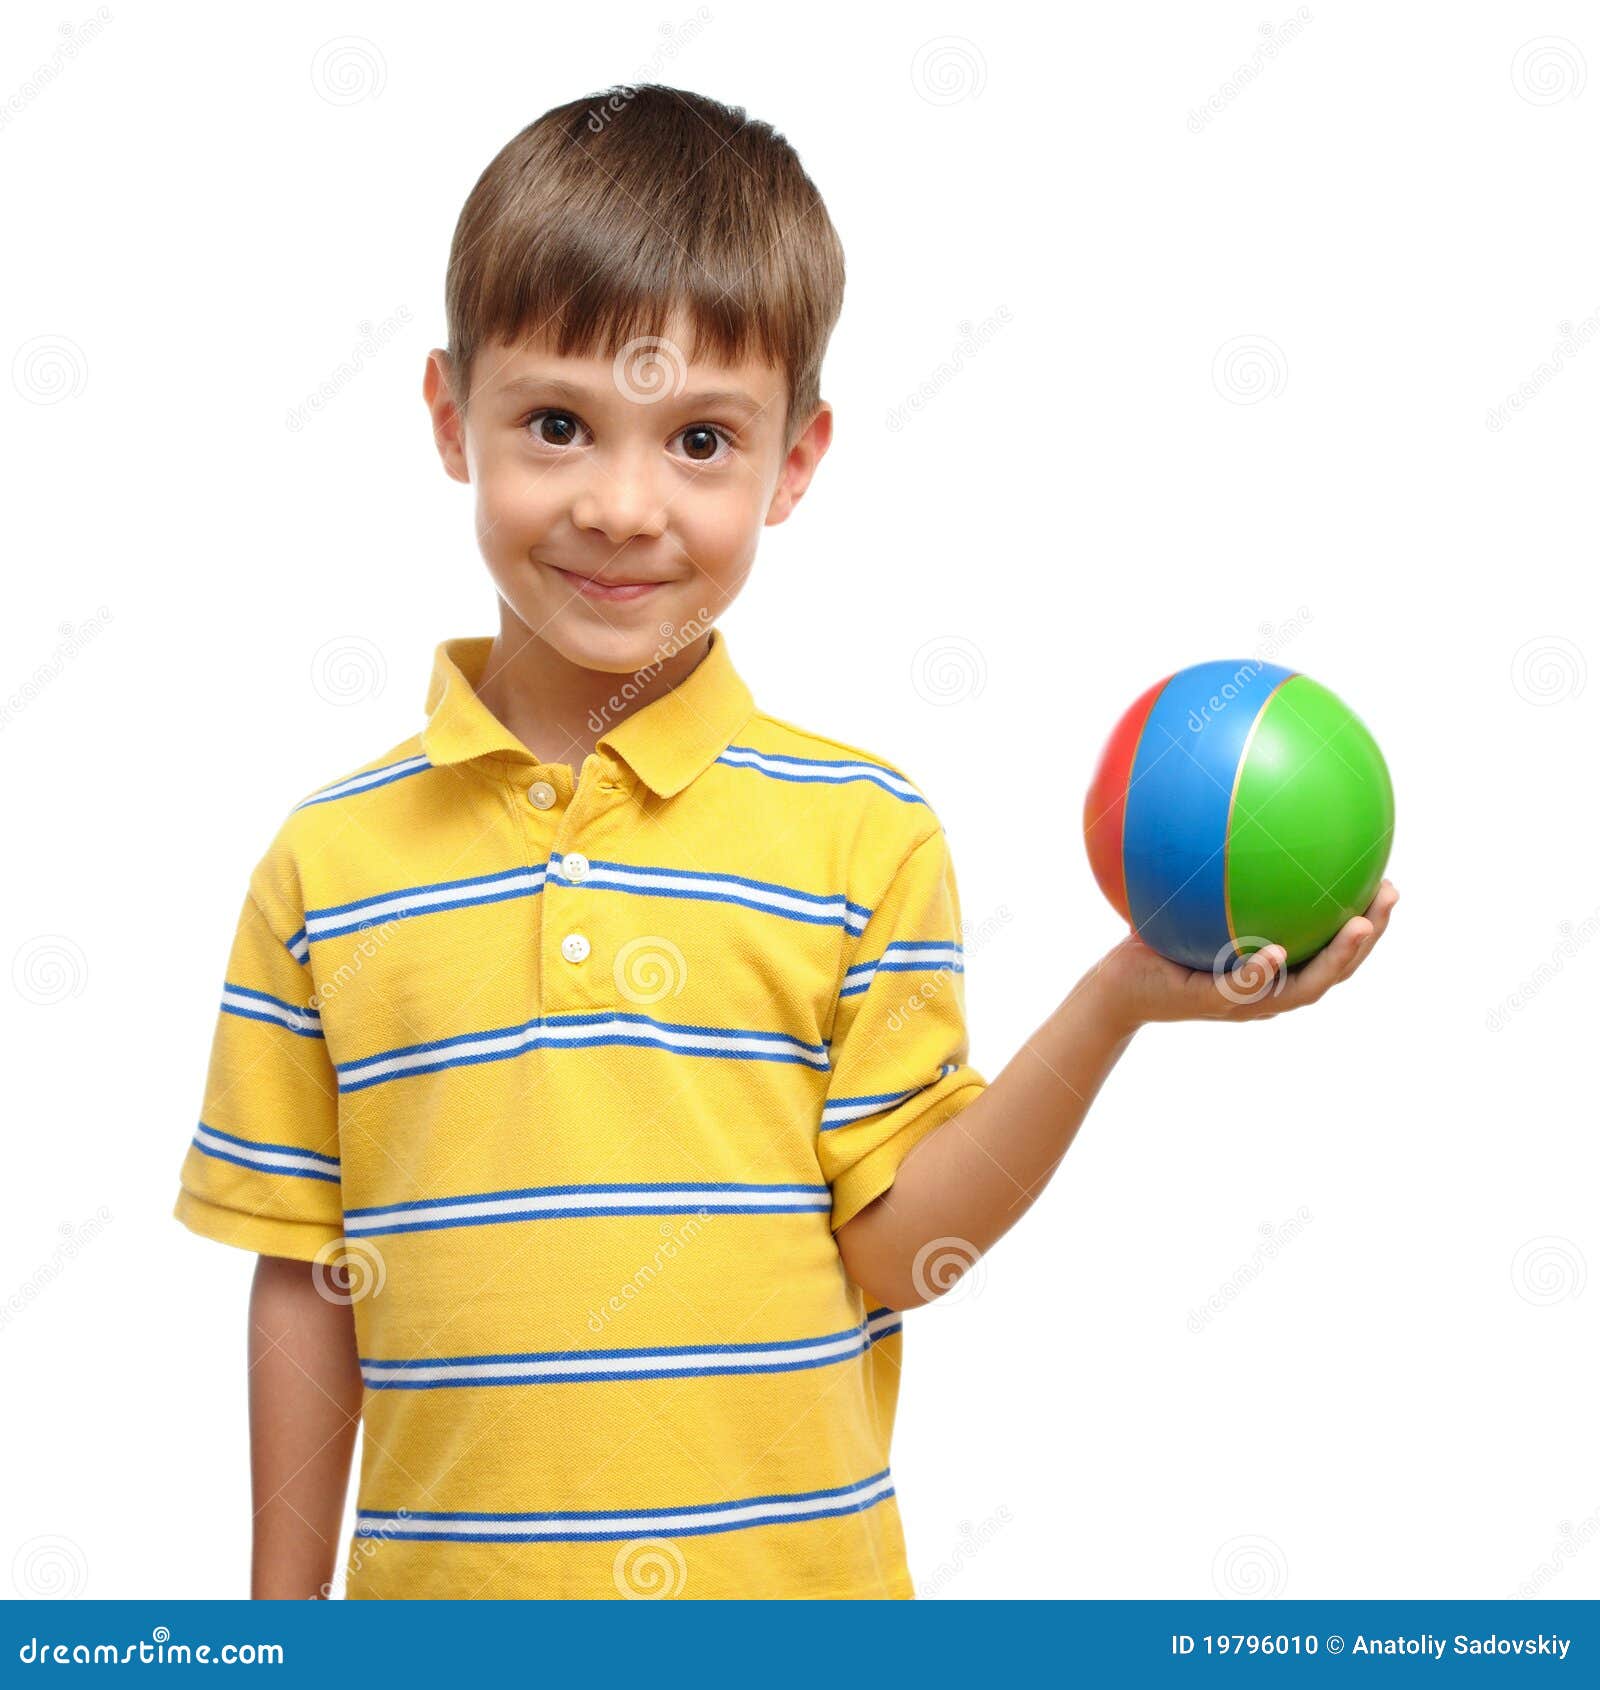 Child Playing with Colorful Toy Rubber Ball Stock Photo - Image of ...